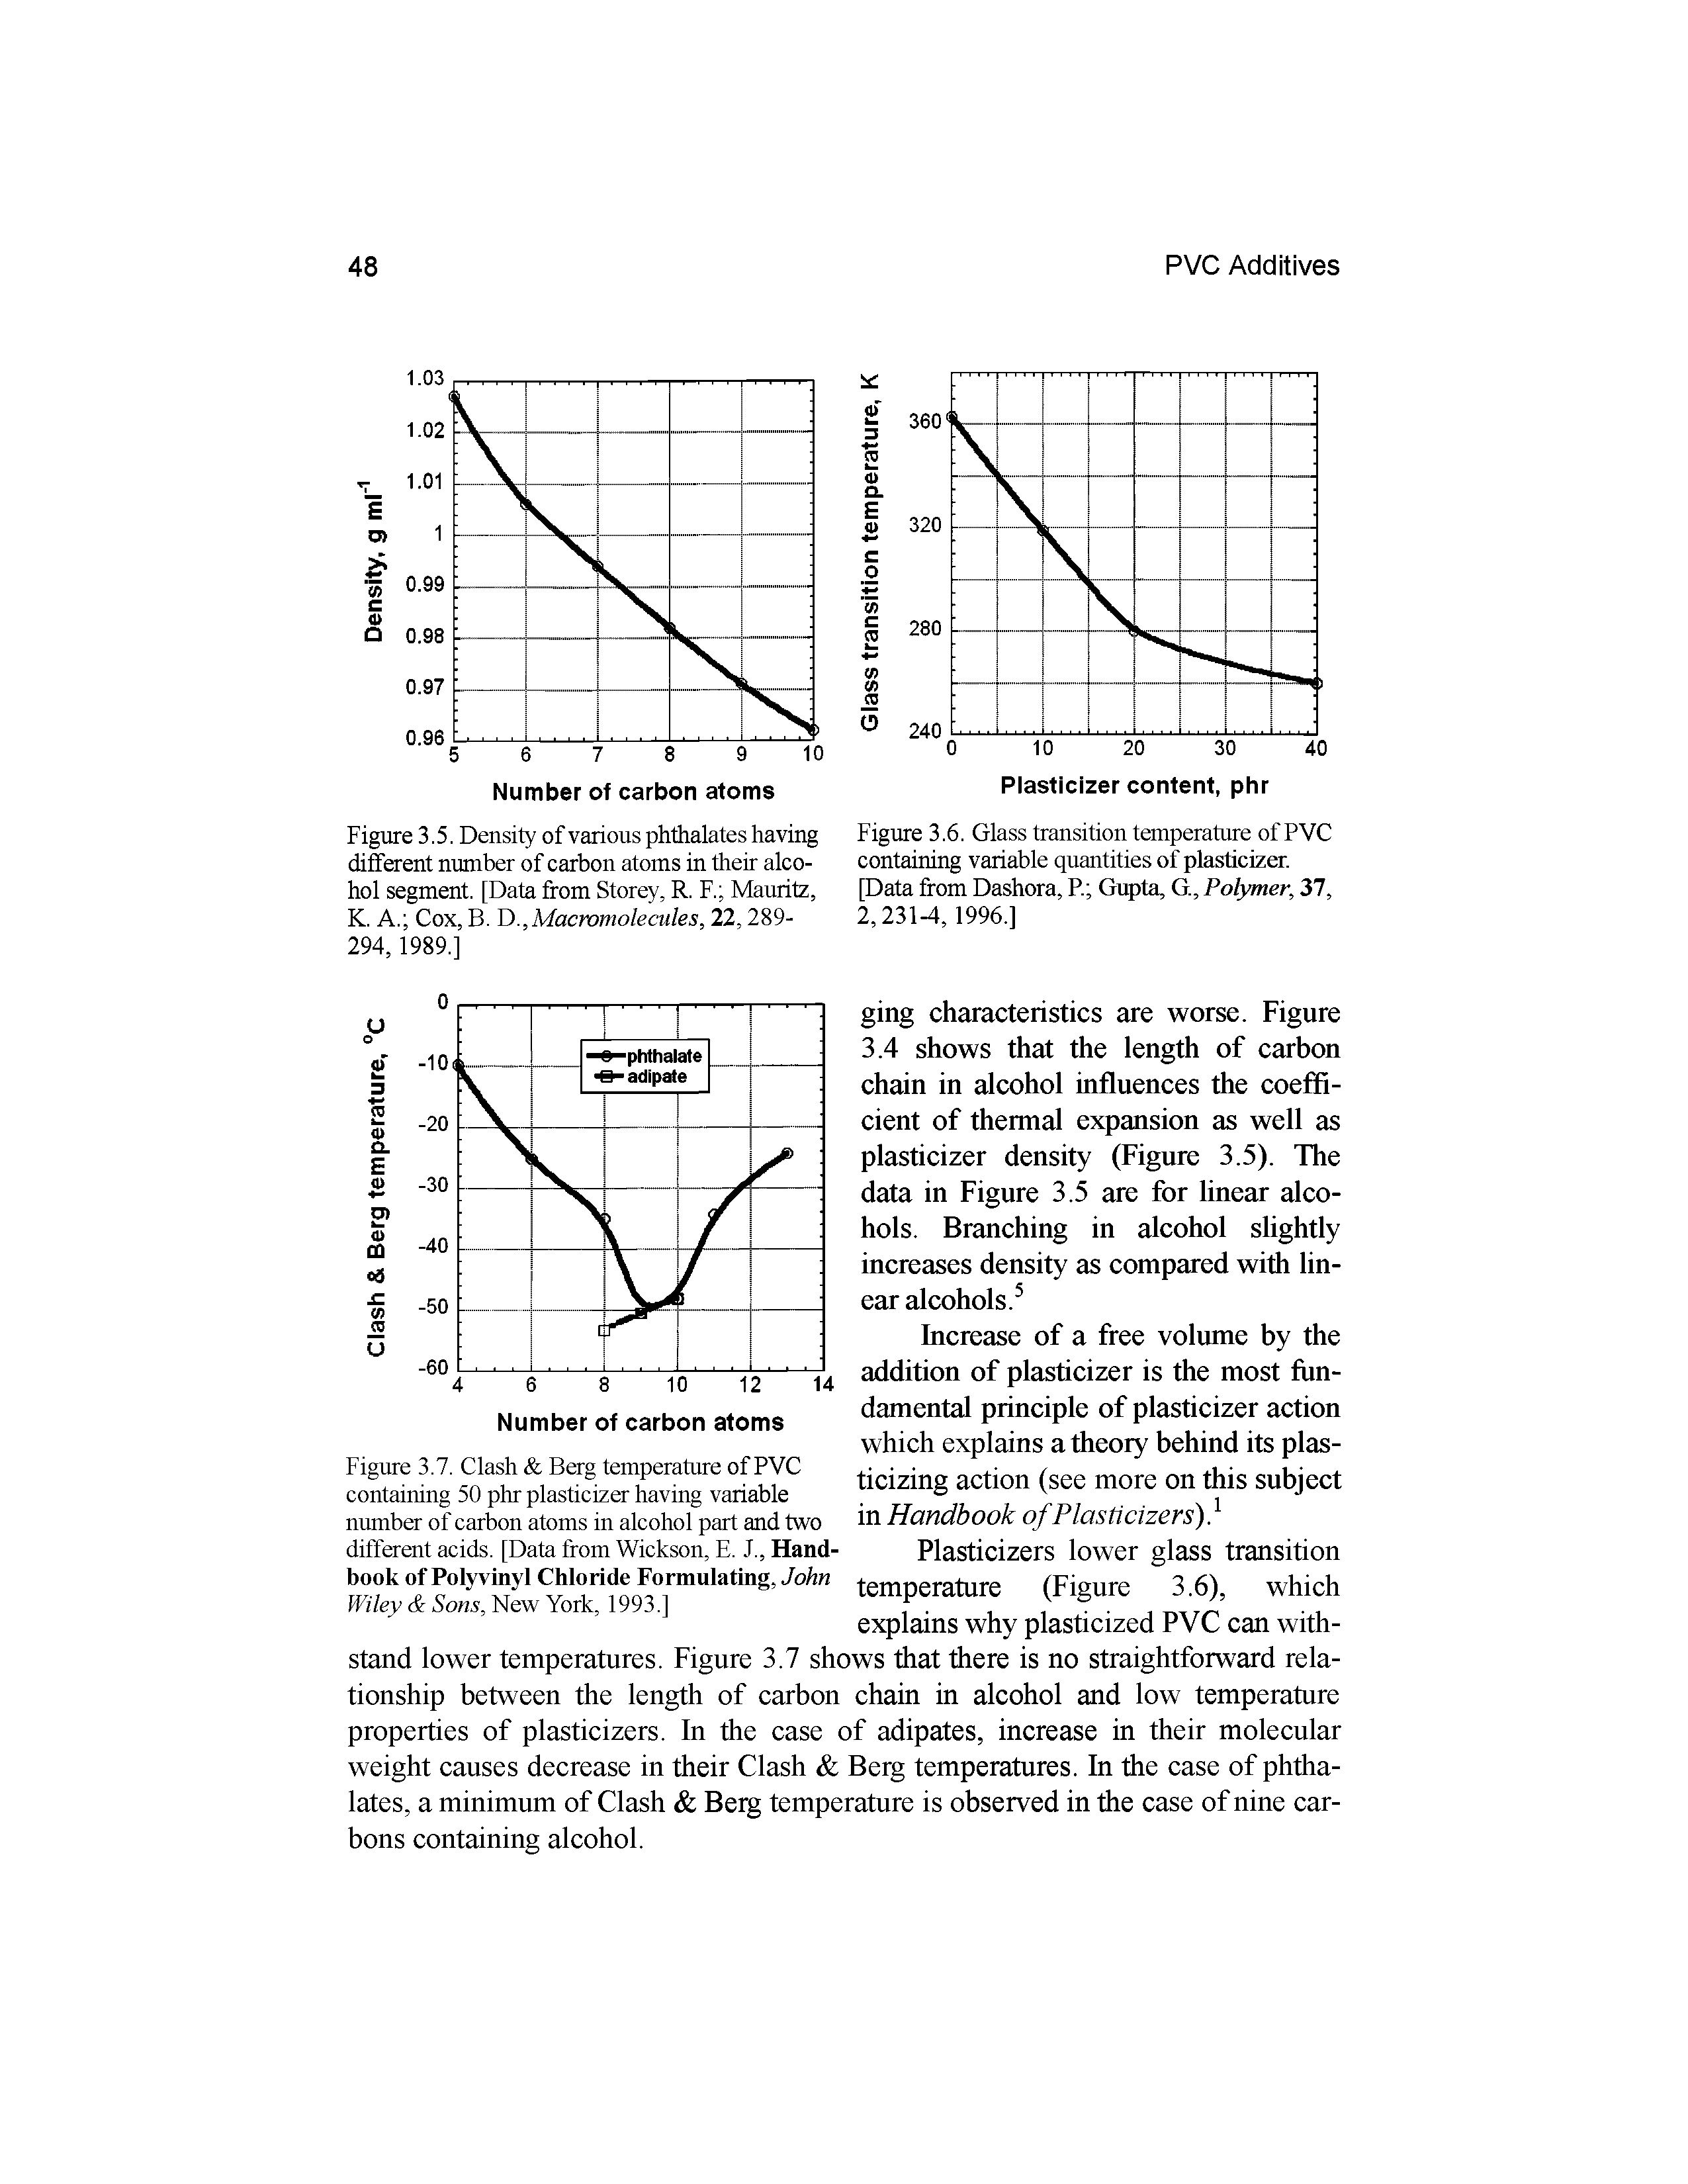 Figure 3.6. Glass transition temperature of PVC containing variable quantities of plasticizer. [Data from Dashora, P. Gupta, G, Polymer, 37, 2,231-4,1996.]...